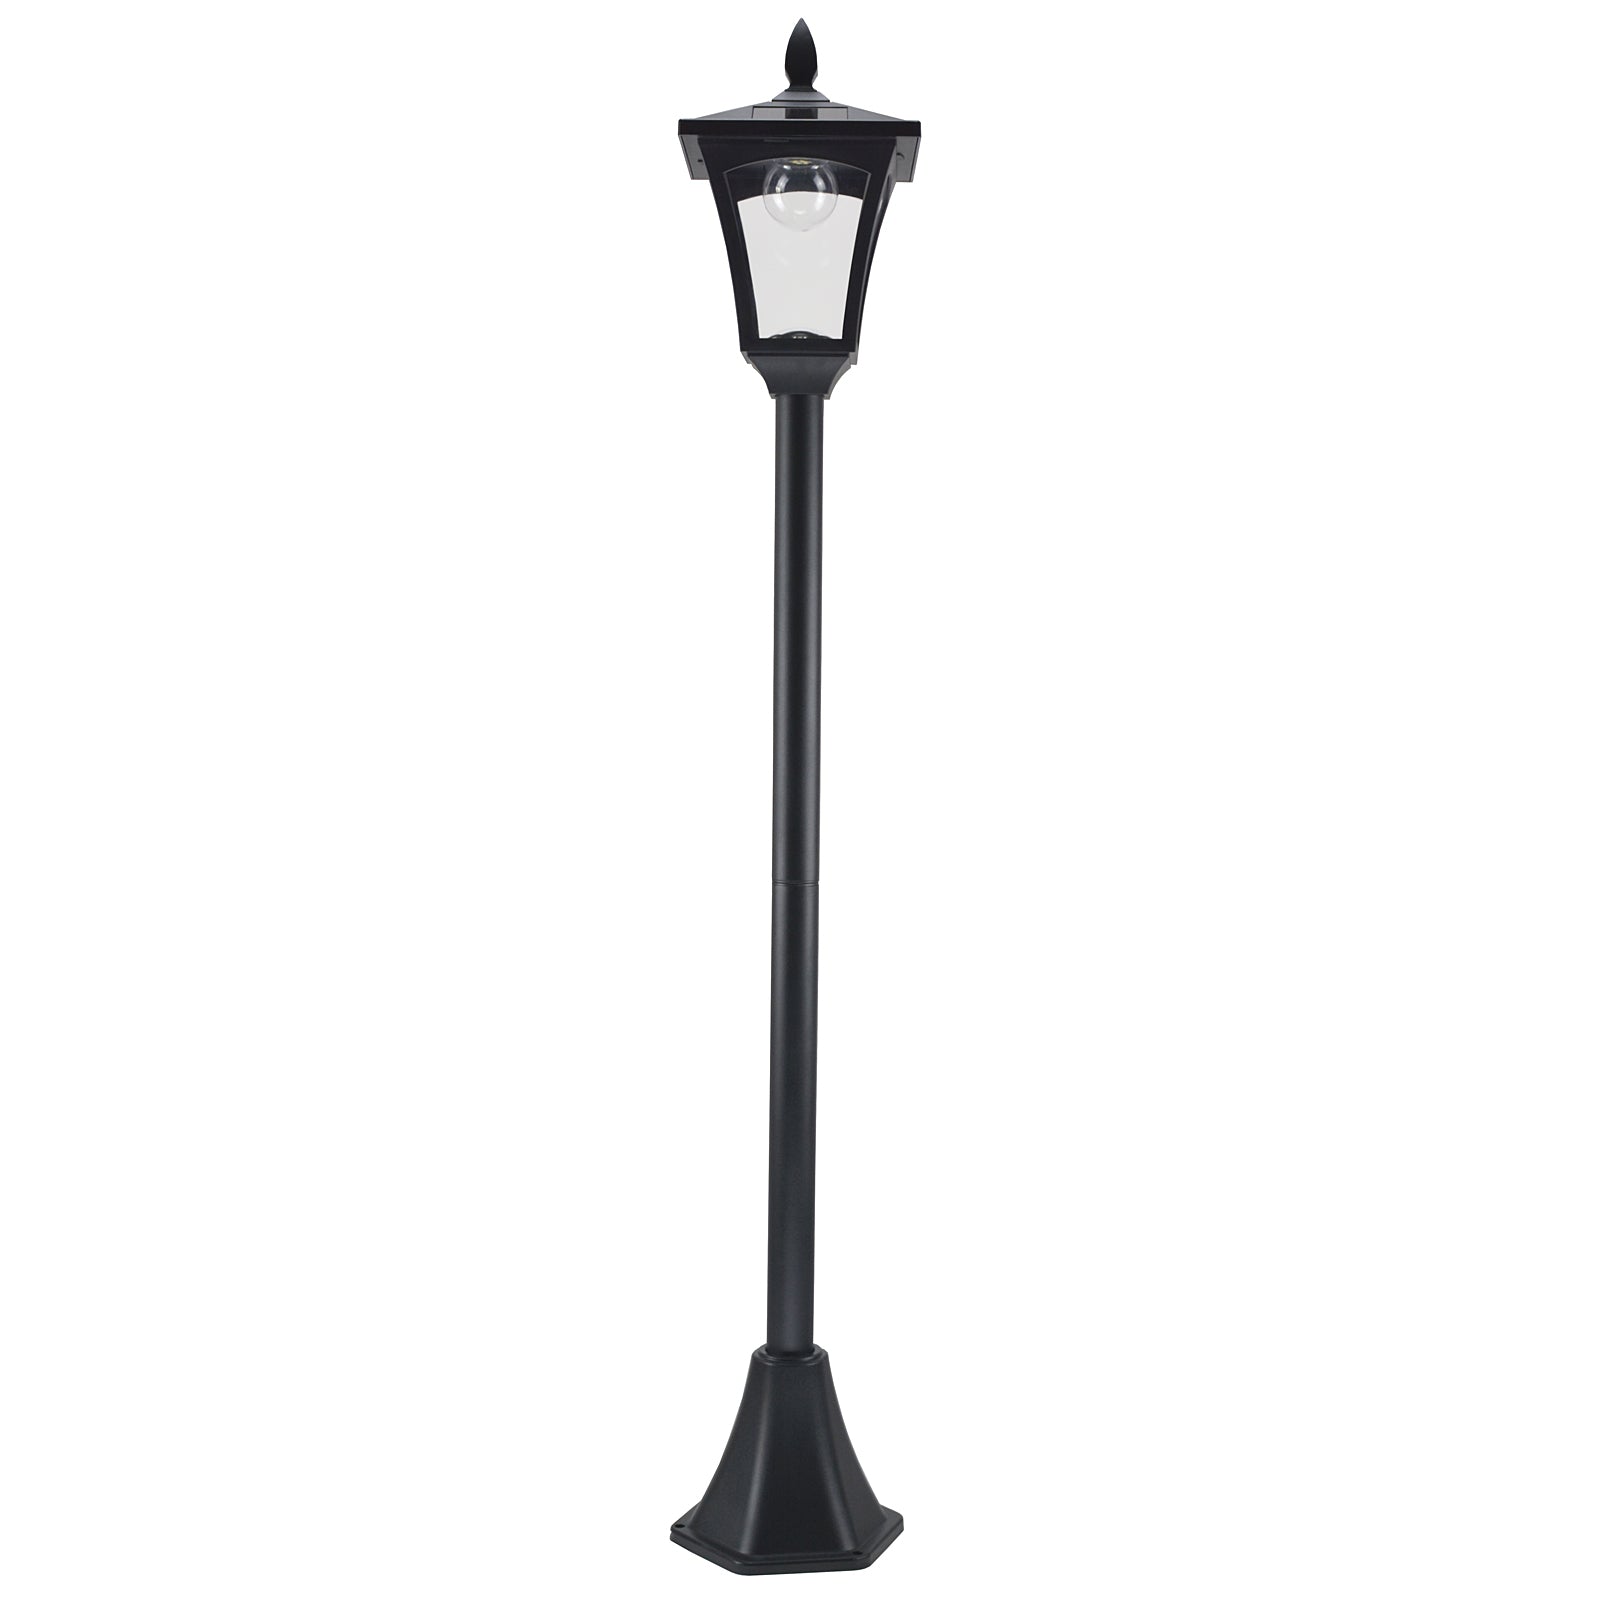 Outsunny Outdoor Lamp Post  | TJ Hughes